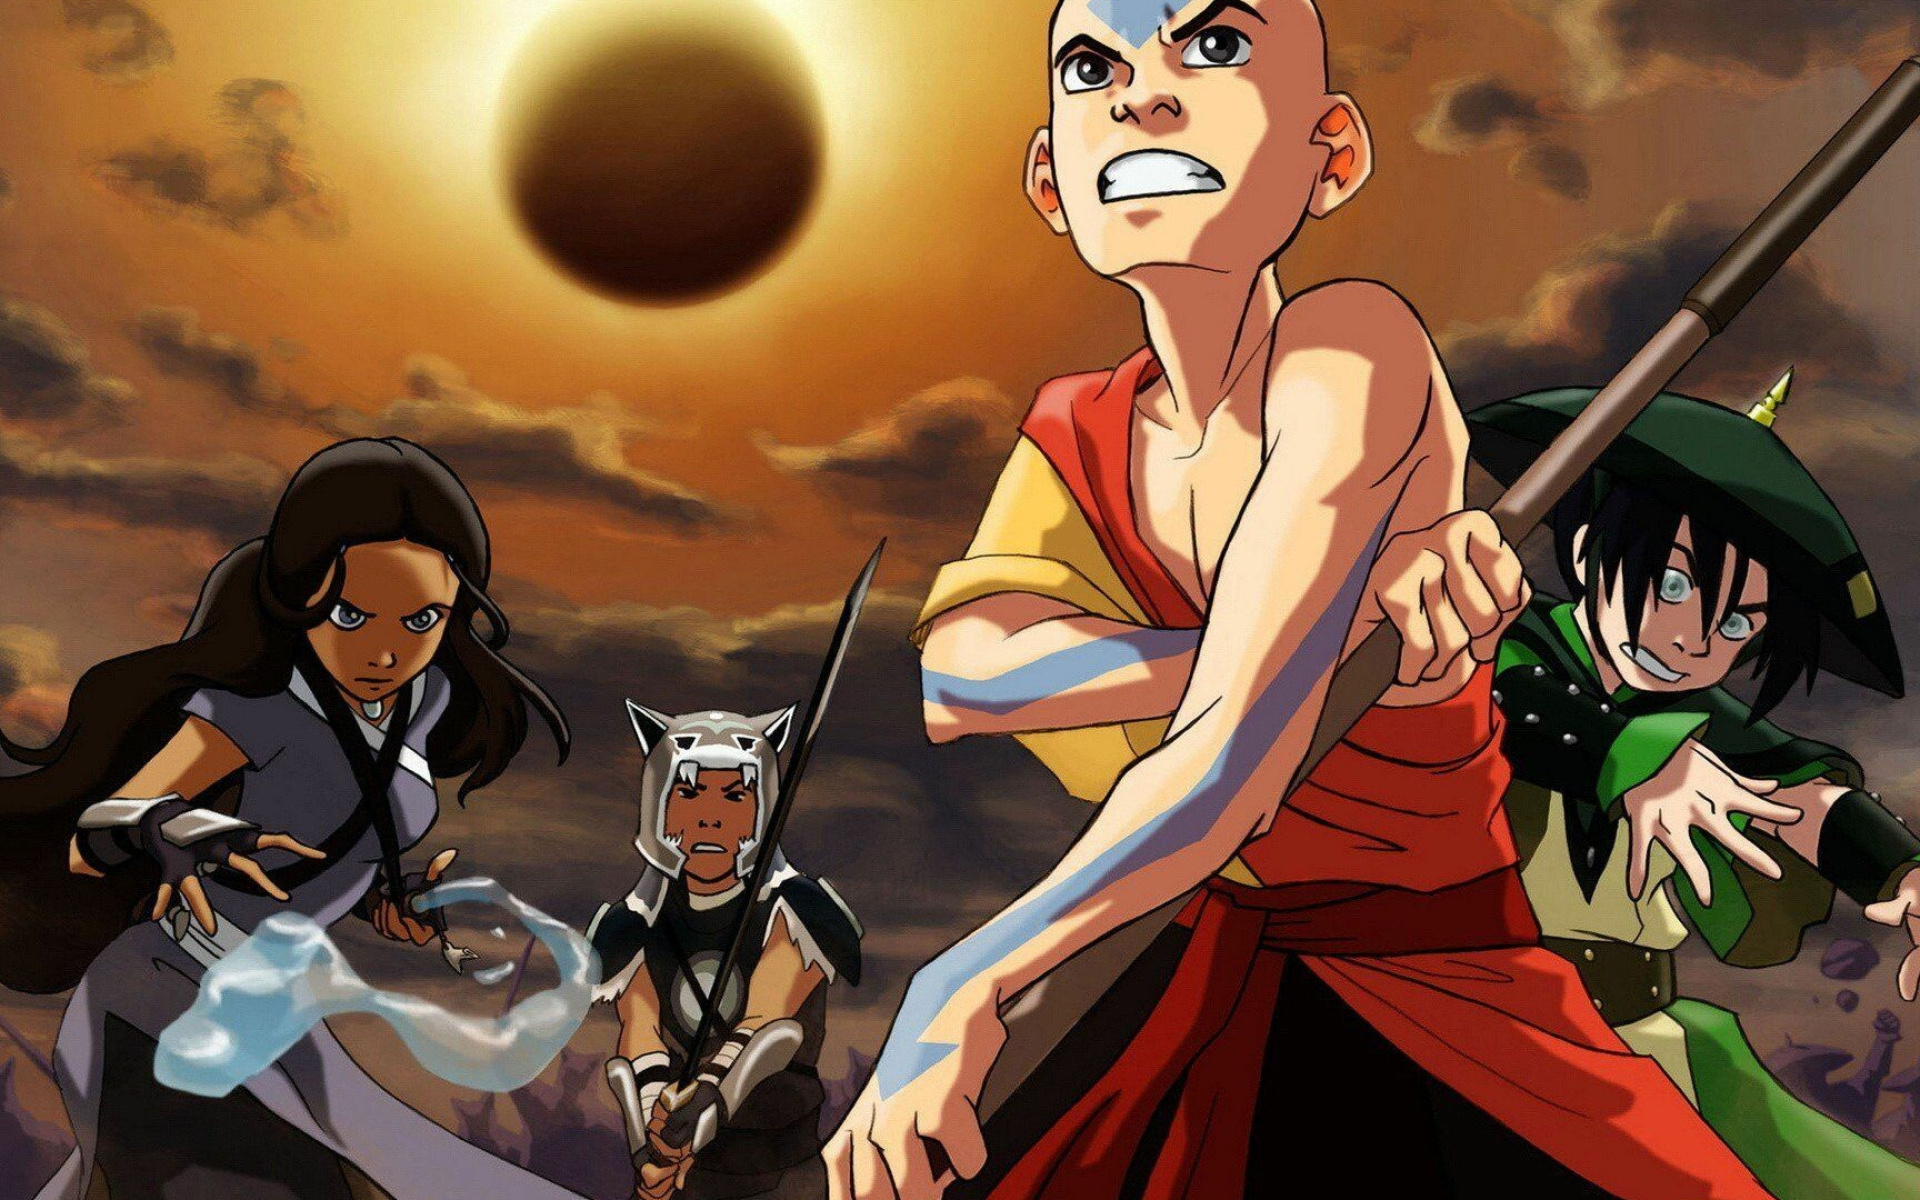 Avatar: The Last Airbender: The complete series was released on Blu-ray in June 2018 in honor of the tenth anniversary of its finale. 1920x1200 HD Wallpaper.